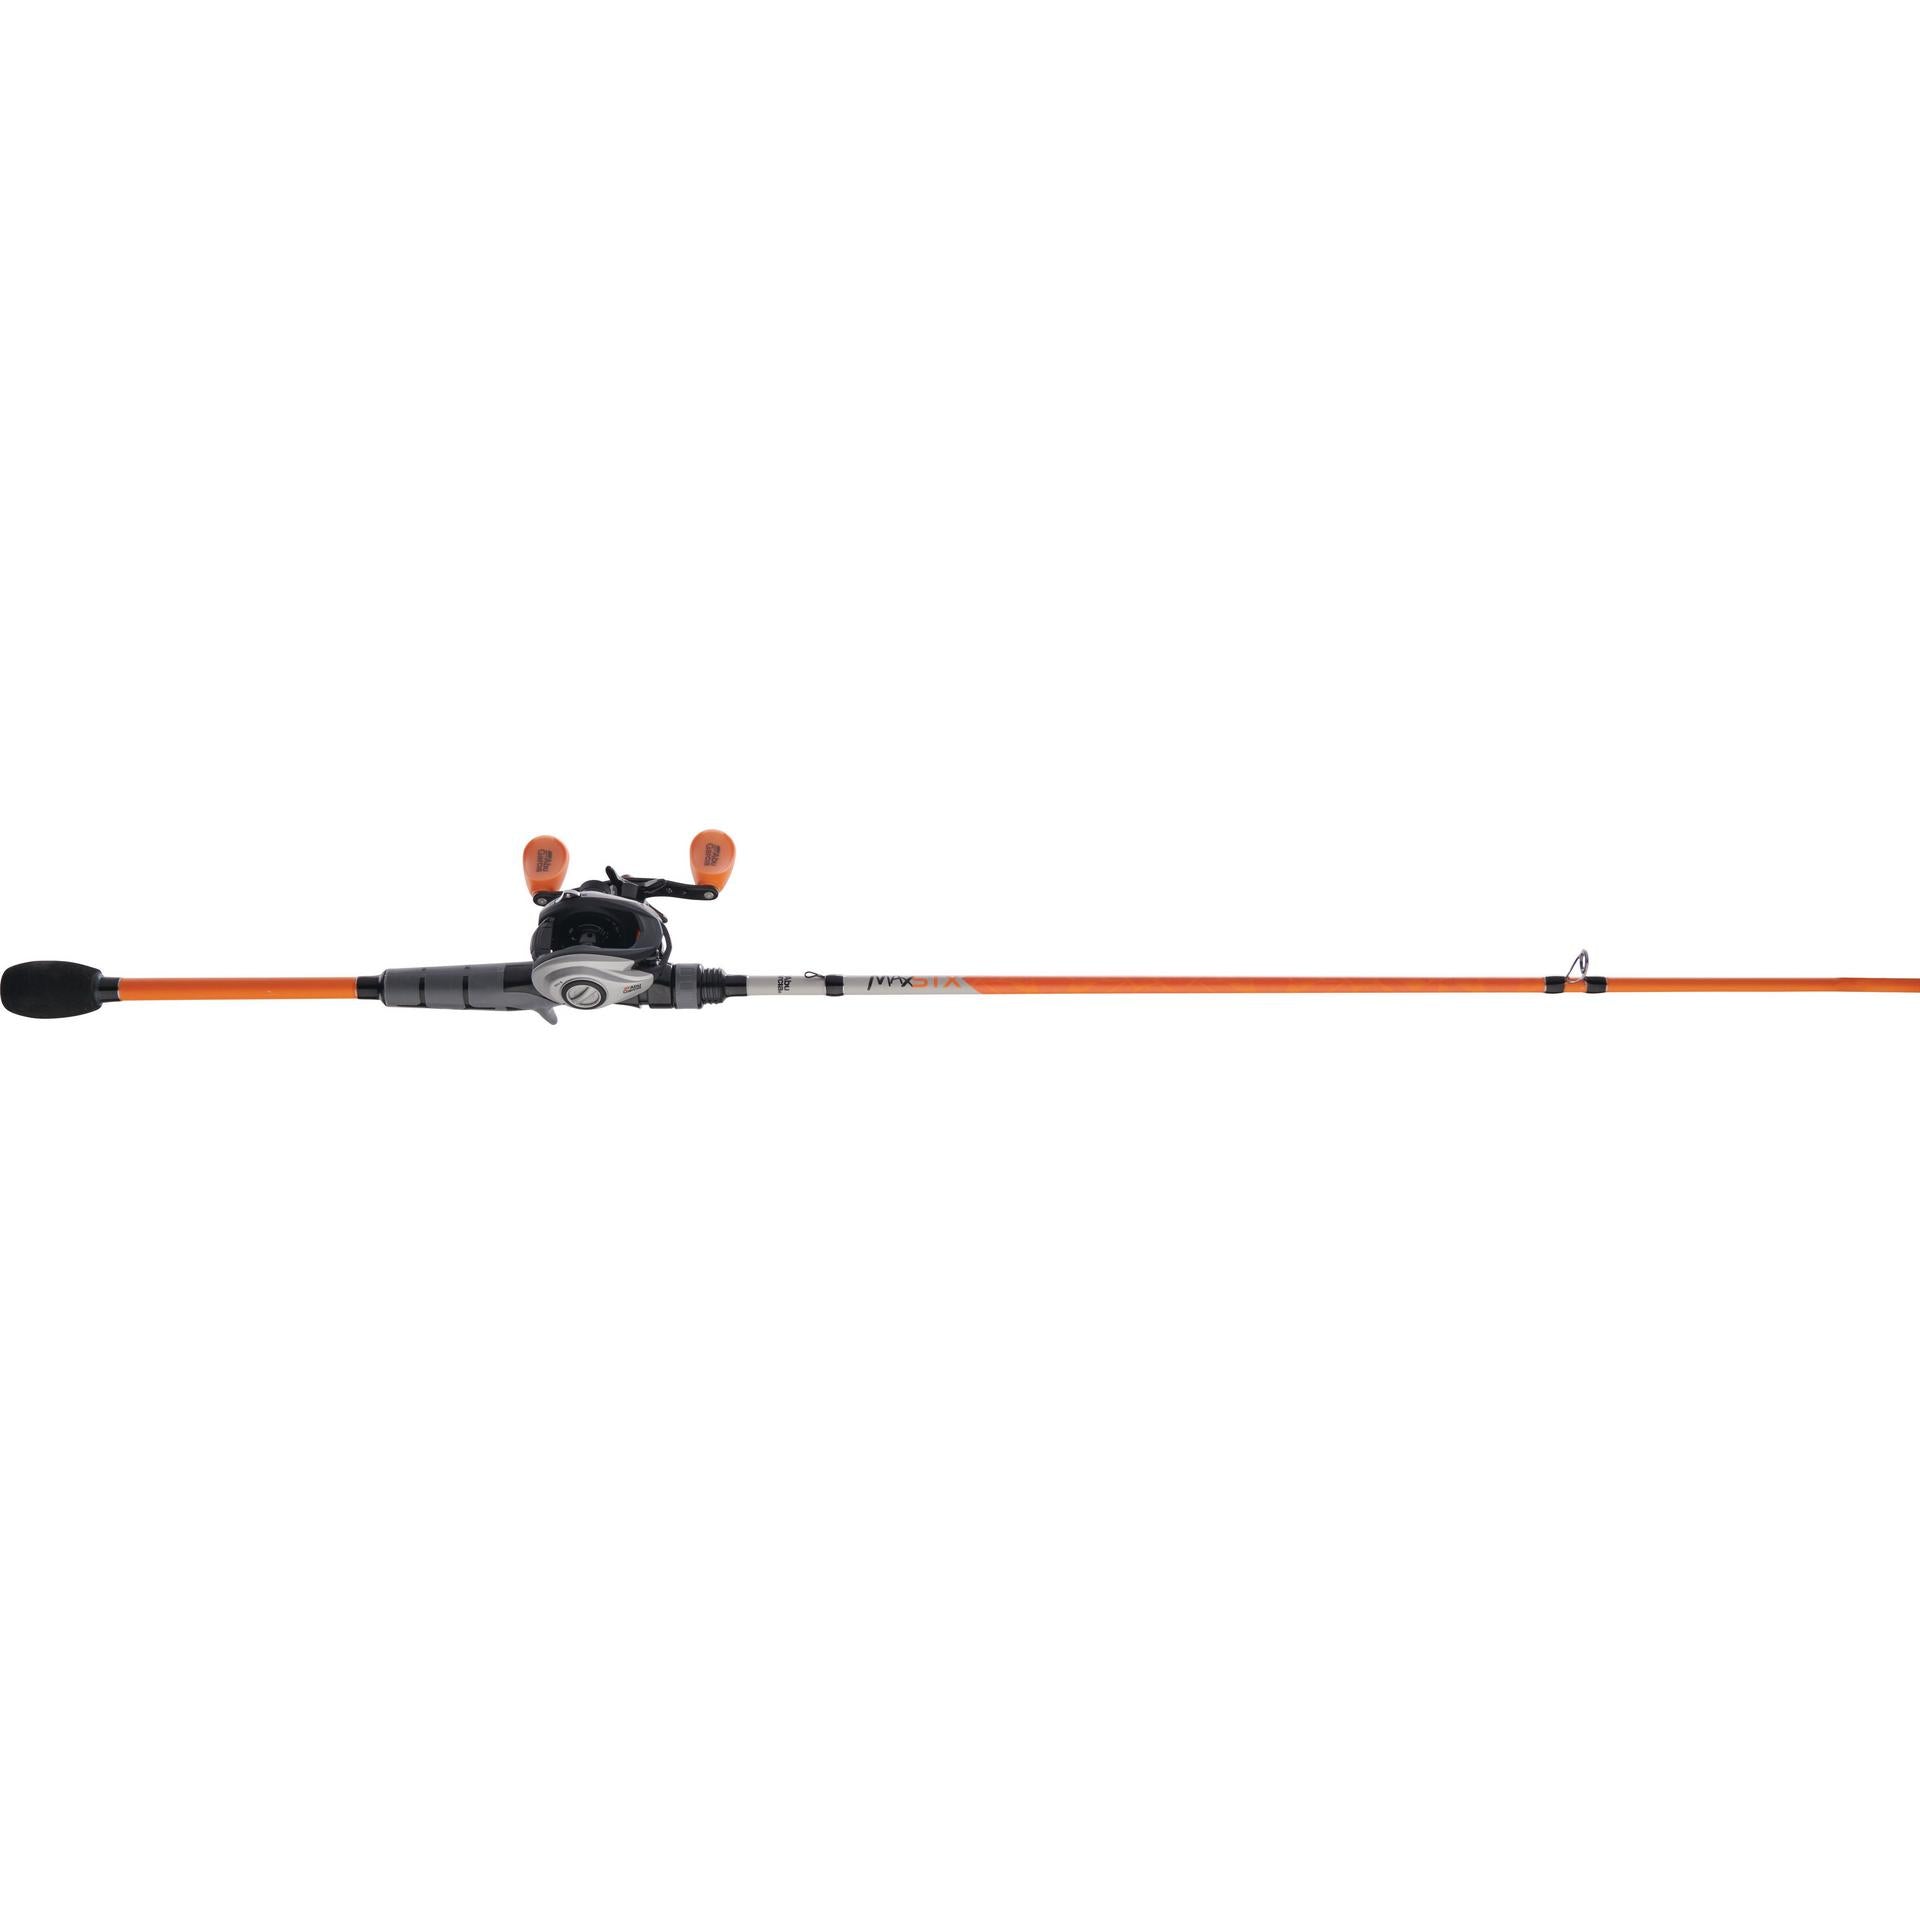 Abu Garcia Max Next Generation Baitcaster Rod & Reel Combo (Available  in-store only) - The Bait Shop Gold Coast